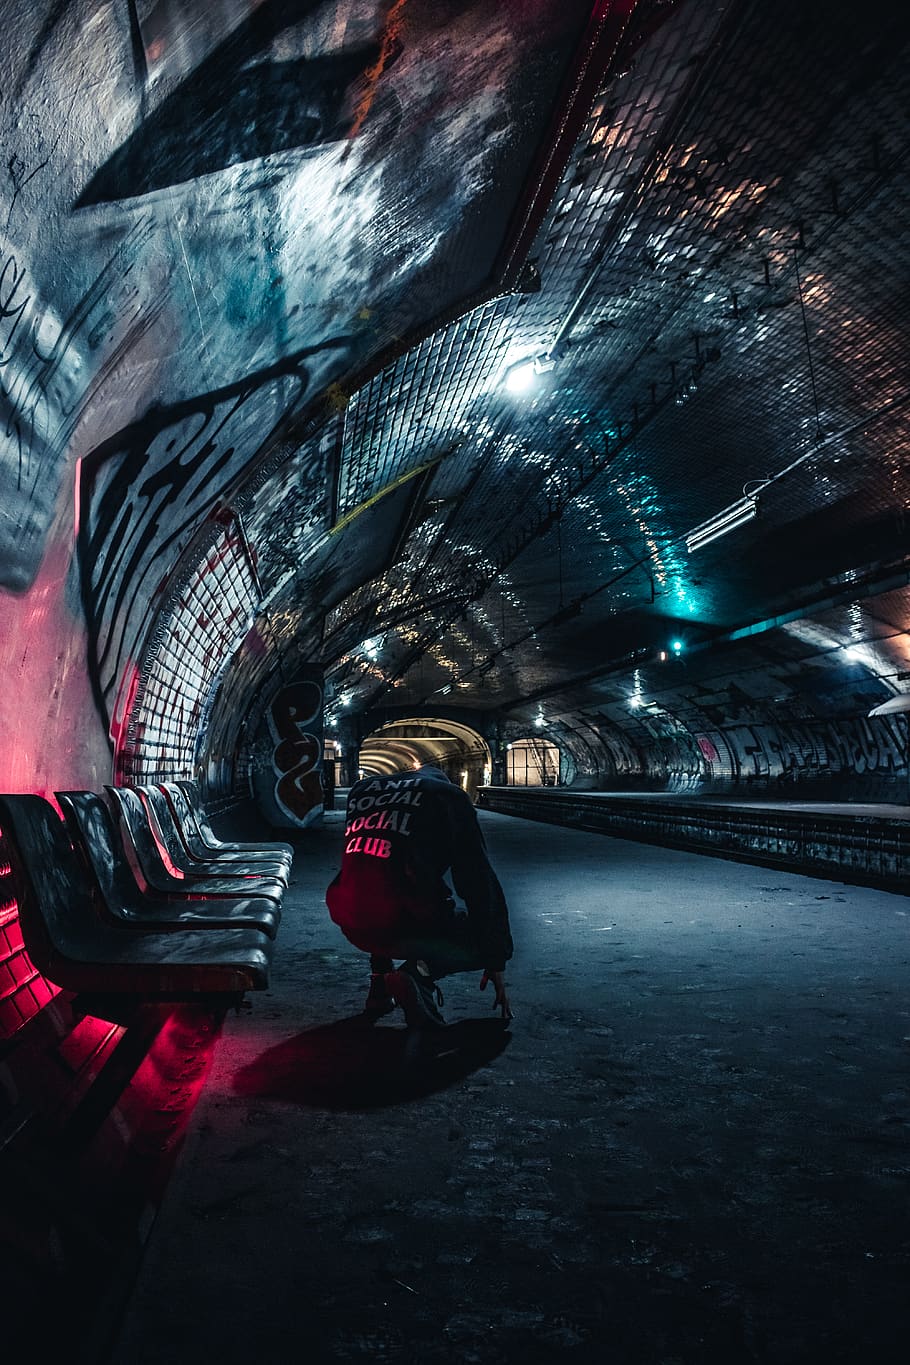 Man Sitting at Tunnel, architecture, blue and red, dark, evening